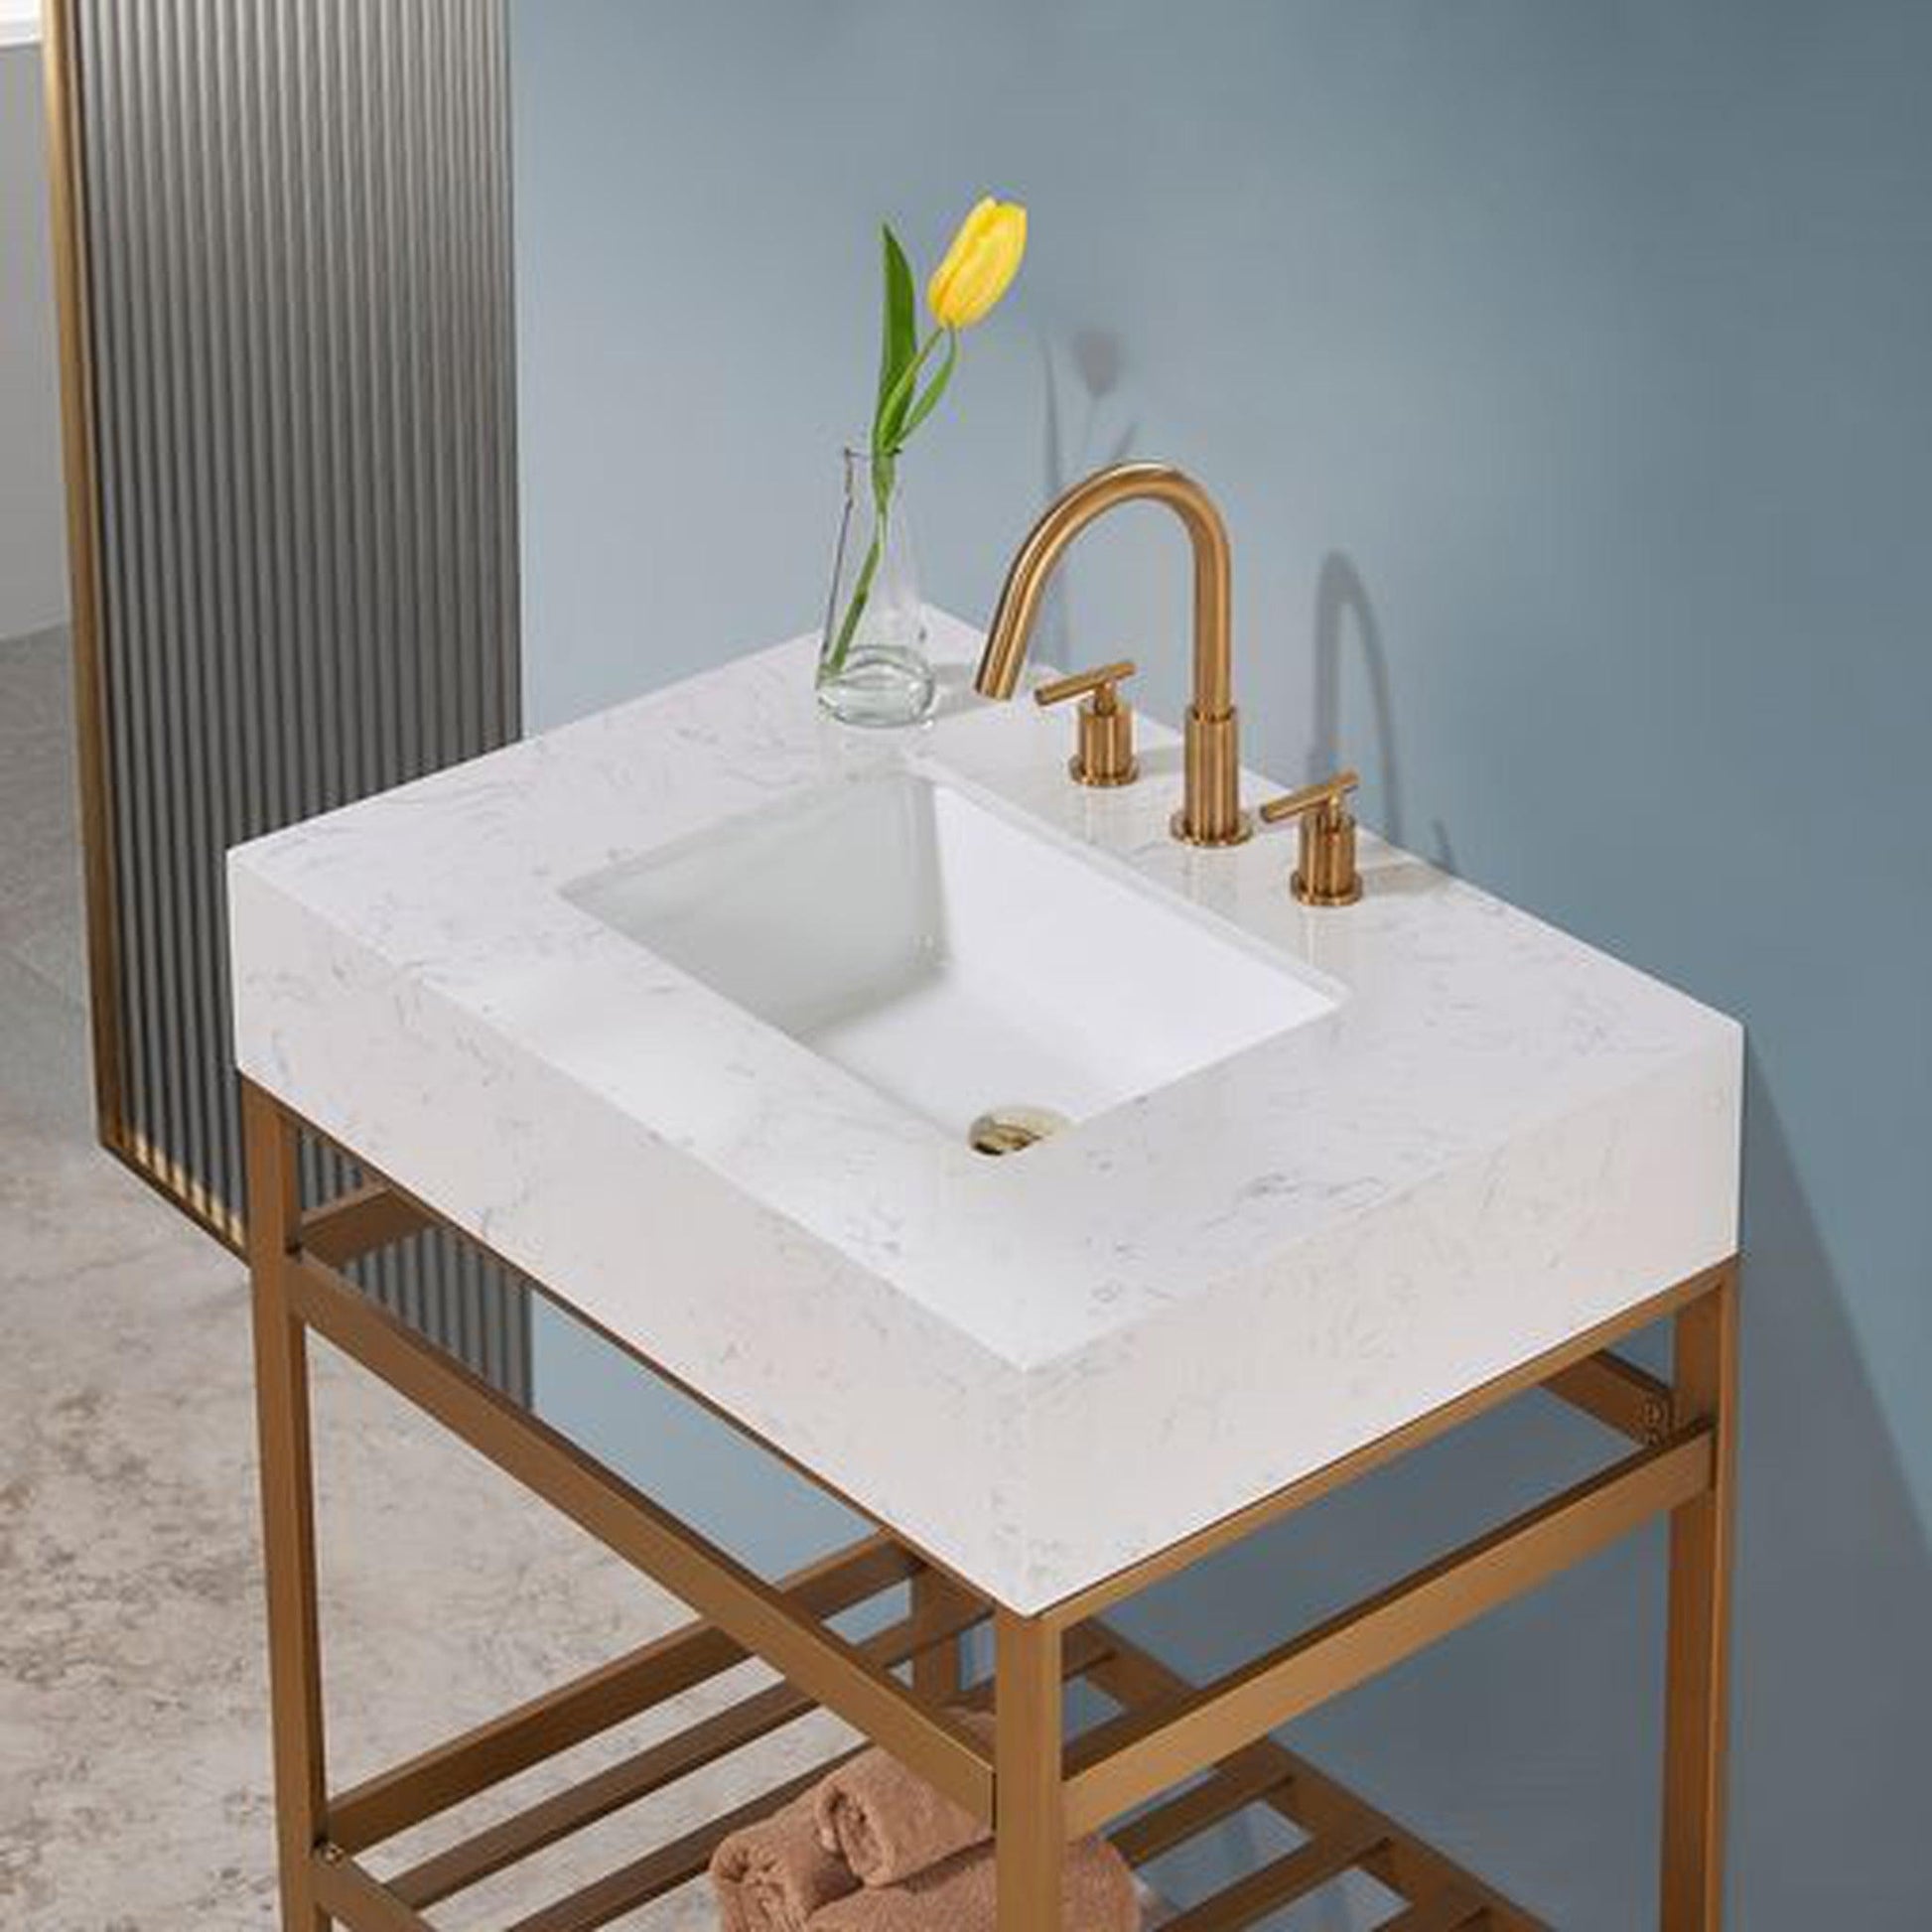 Altair Merano 30" Brushed Gold Single Stainless Steel Bathroom Vanity Set Console With Aosta White Stone Top, Single Rectangular Undermount Ceramic Sink, and Safety Overflow Hole